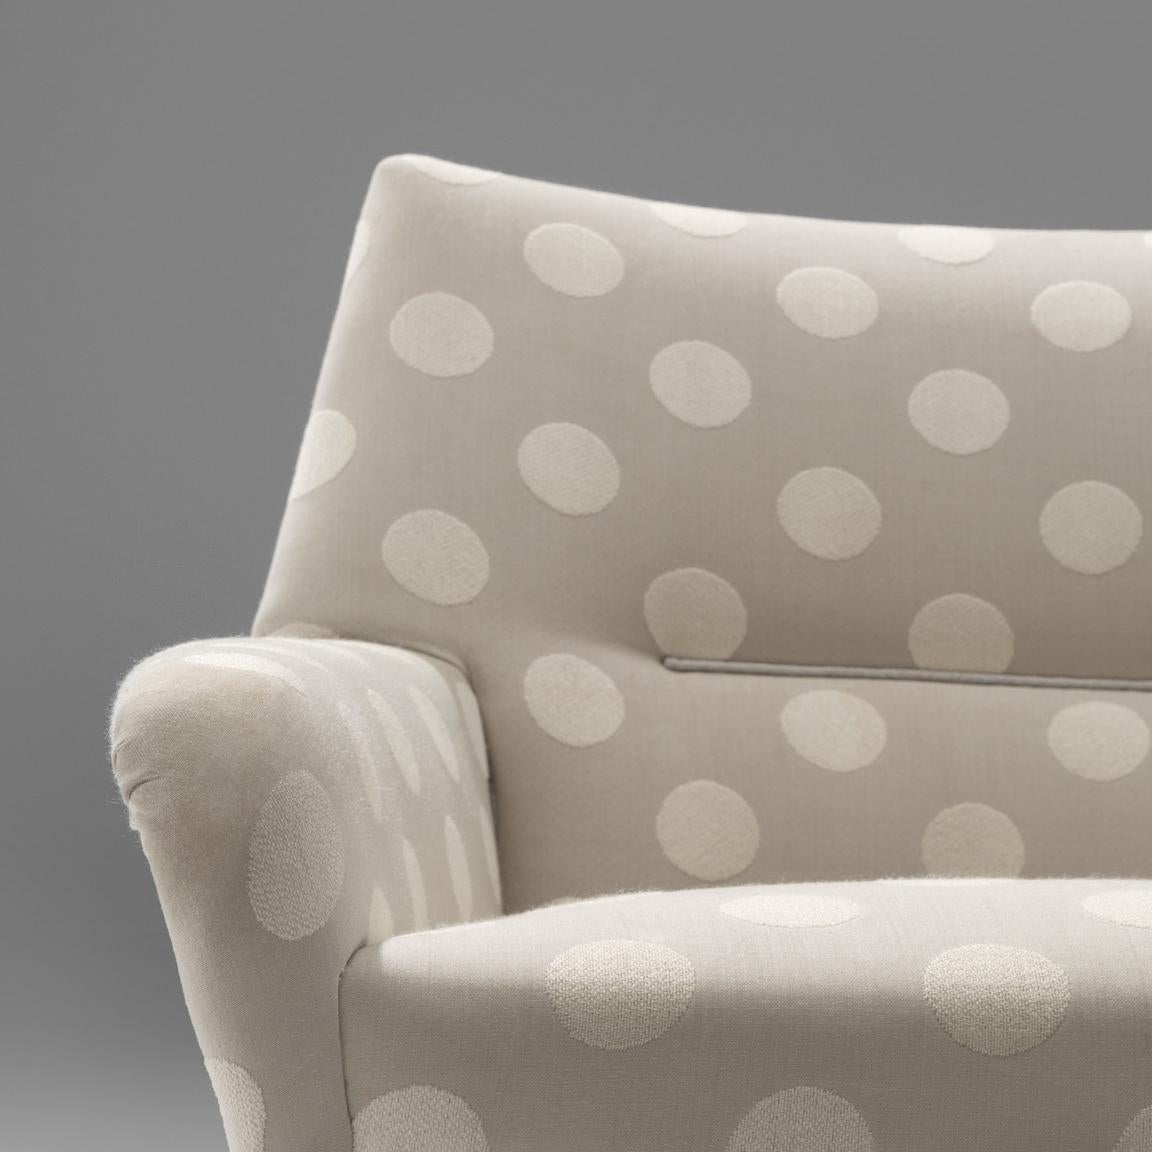 Scandinavian Modern Danish Pair of Easy Chairs in Grey and White Polkadot Upholstery For Sale